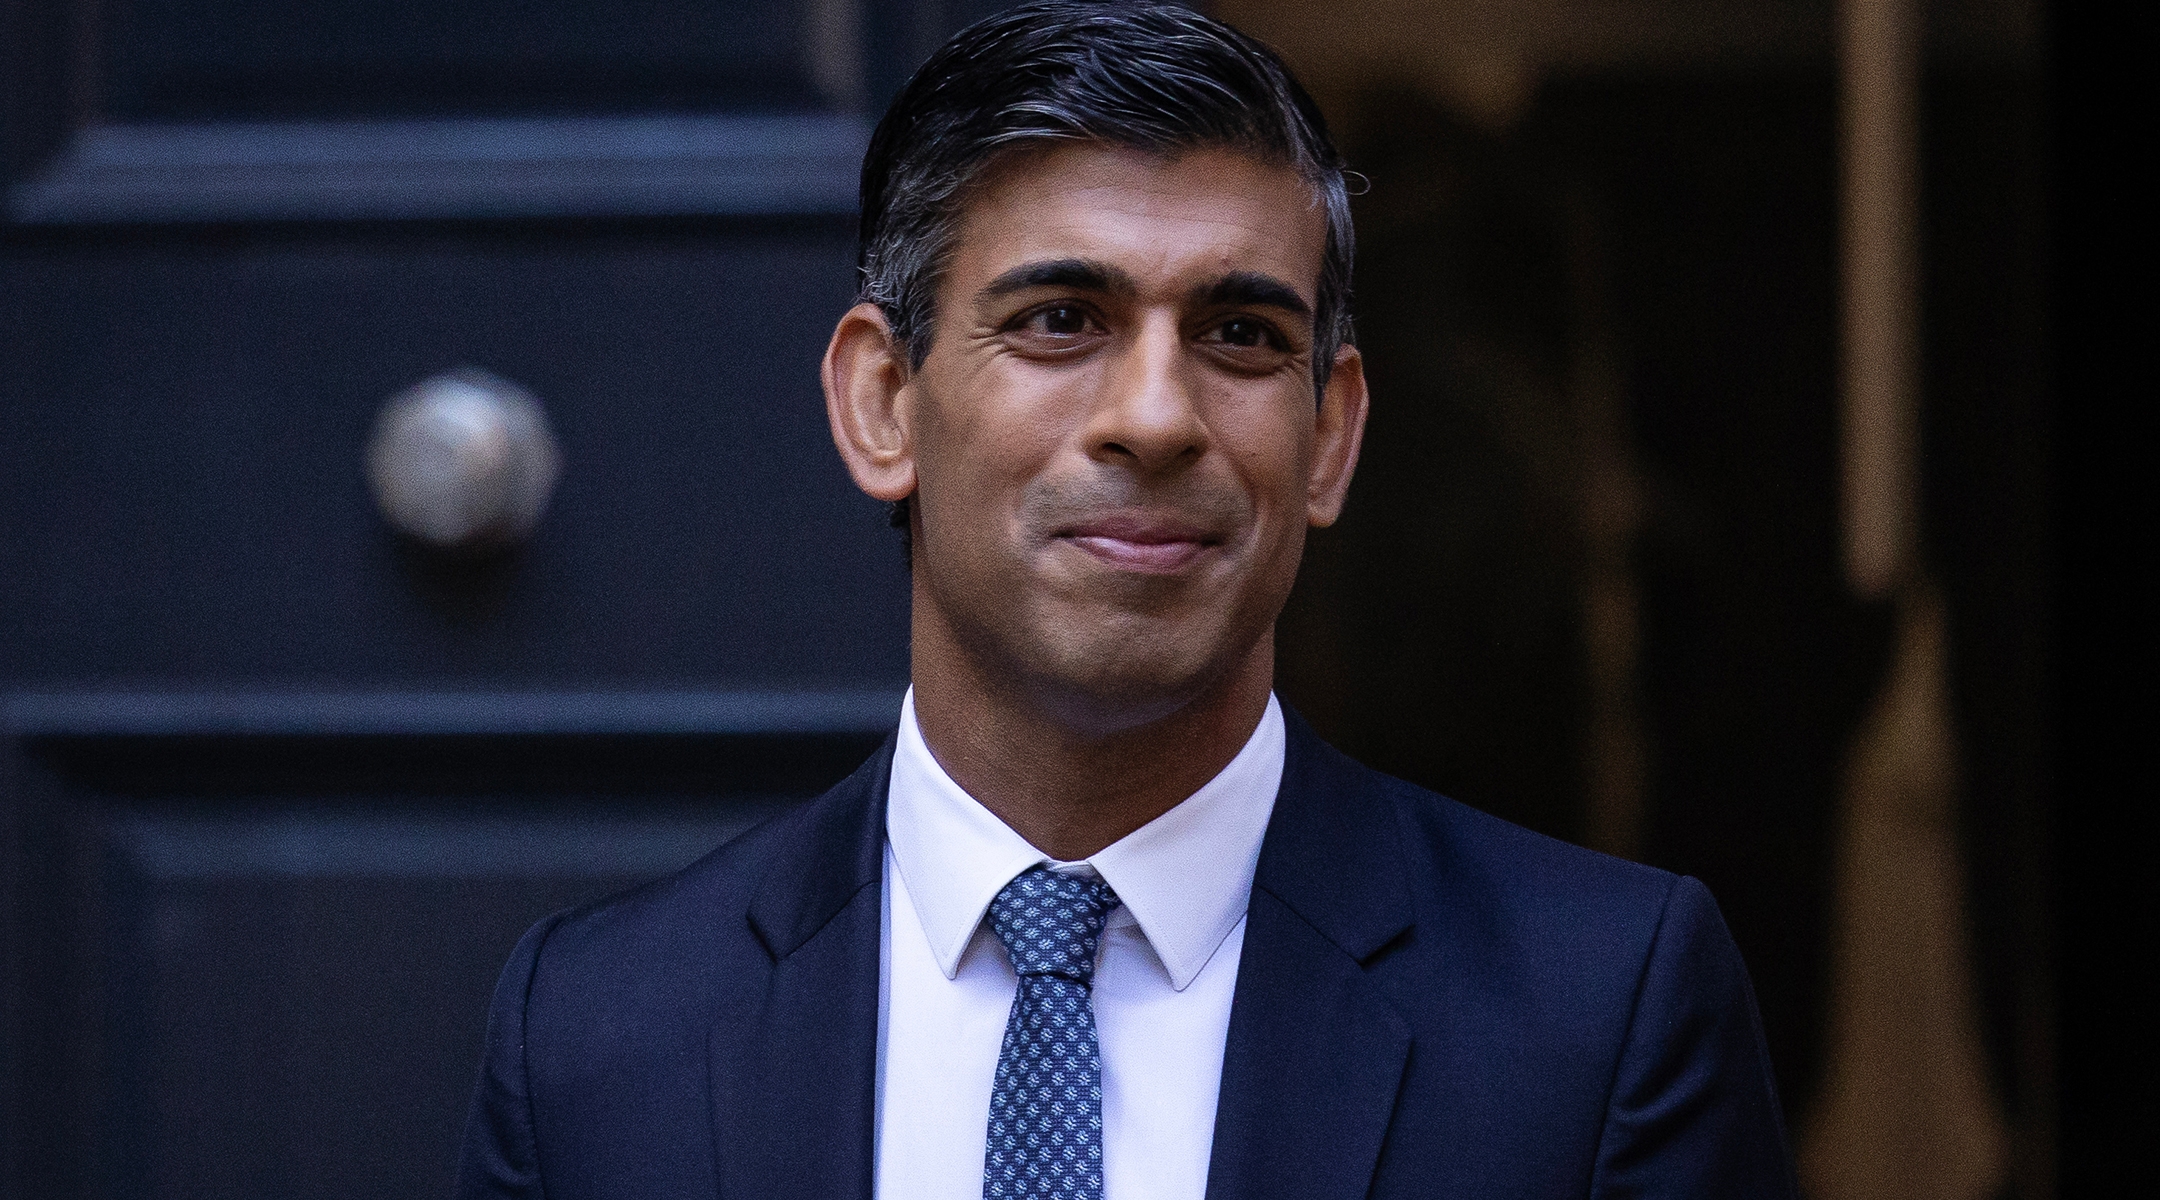 Rishi Sunak leaves the Conservative Party headquarters in London, Oct. 24, 2022. (Dan Kitwood/Getty Images)